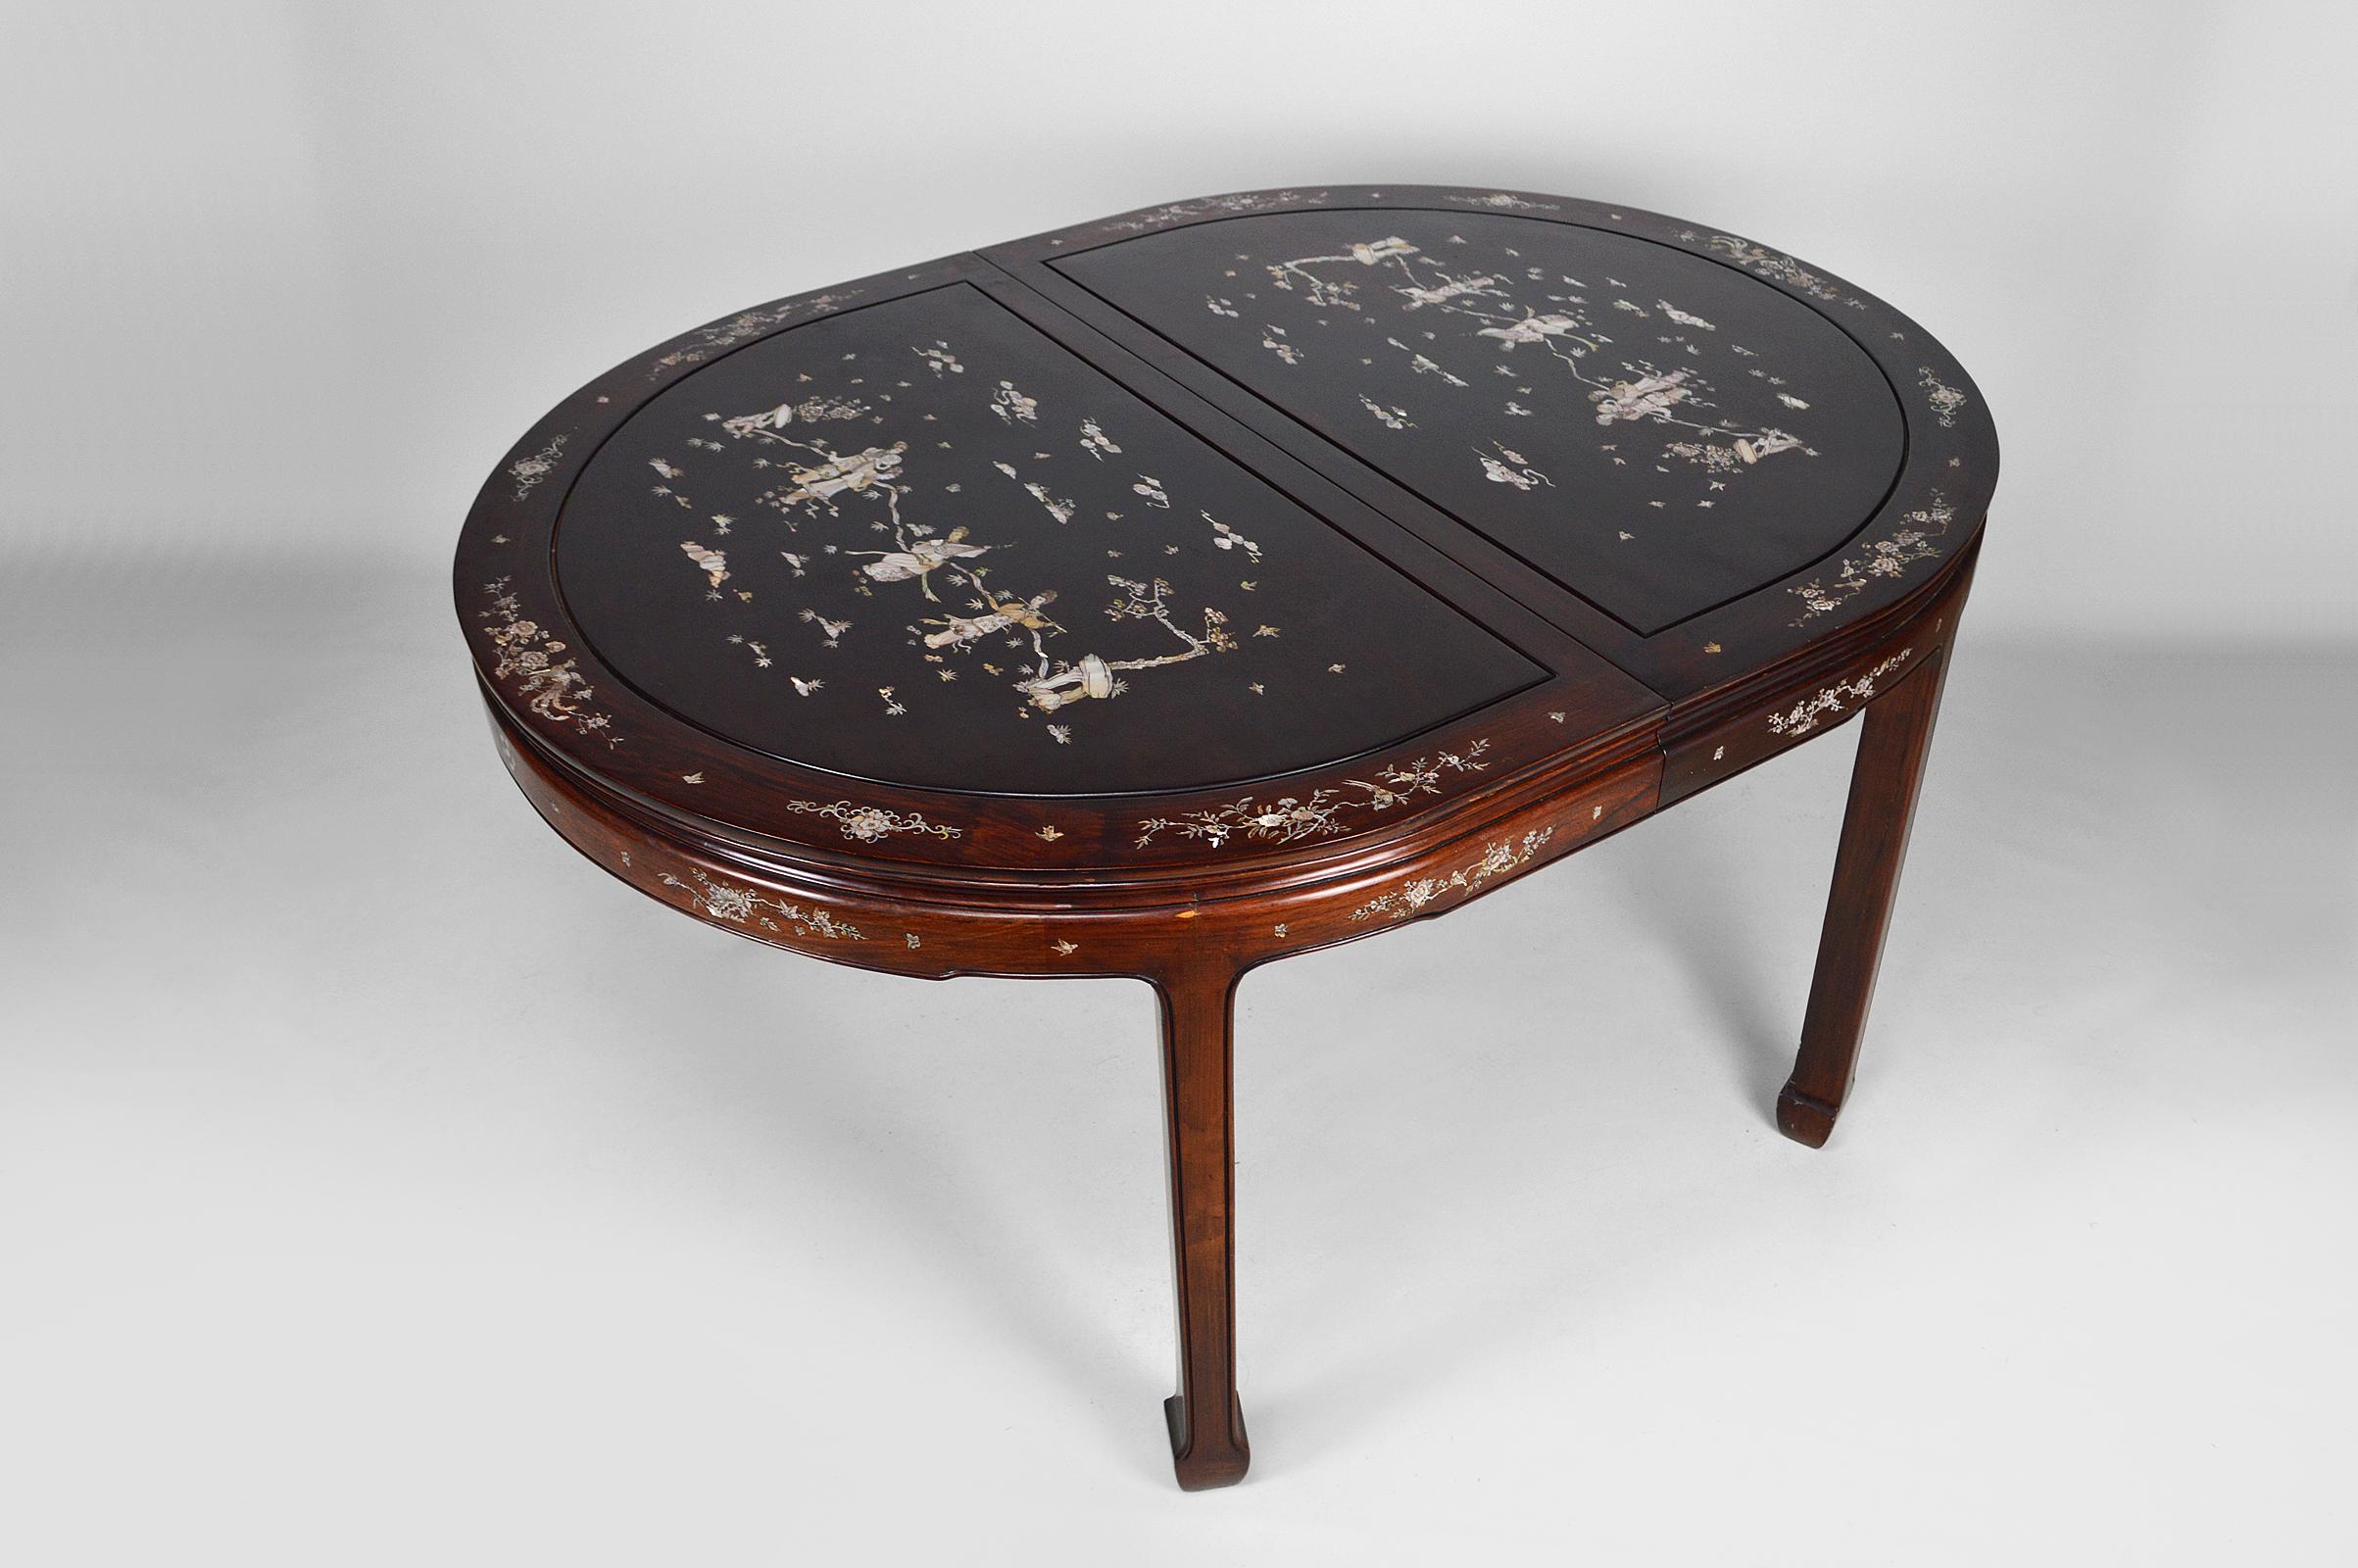 Inlay Asian Inlaid Wooden Dining Table with Extensions, Mid-20th Century